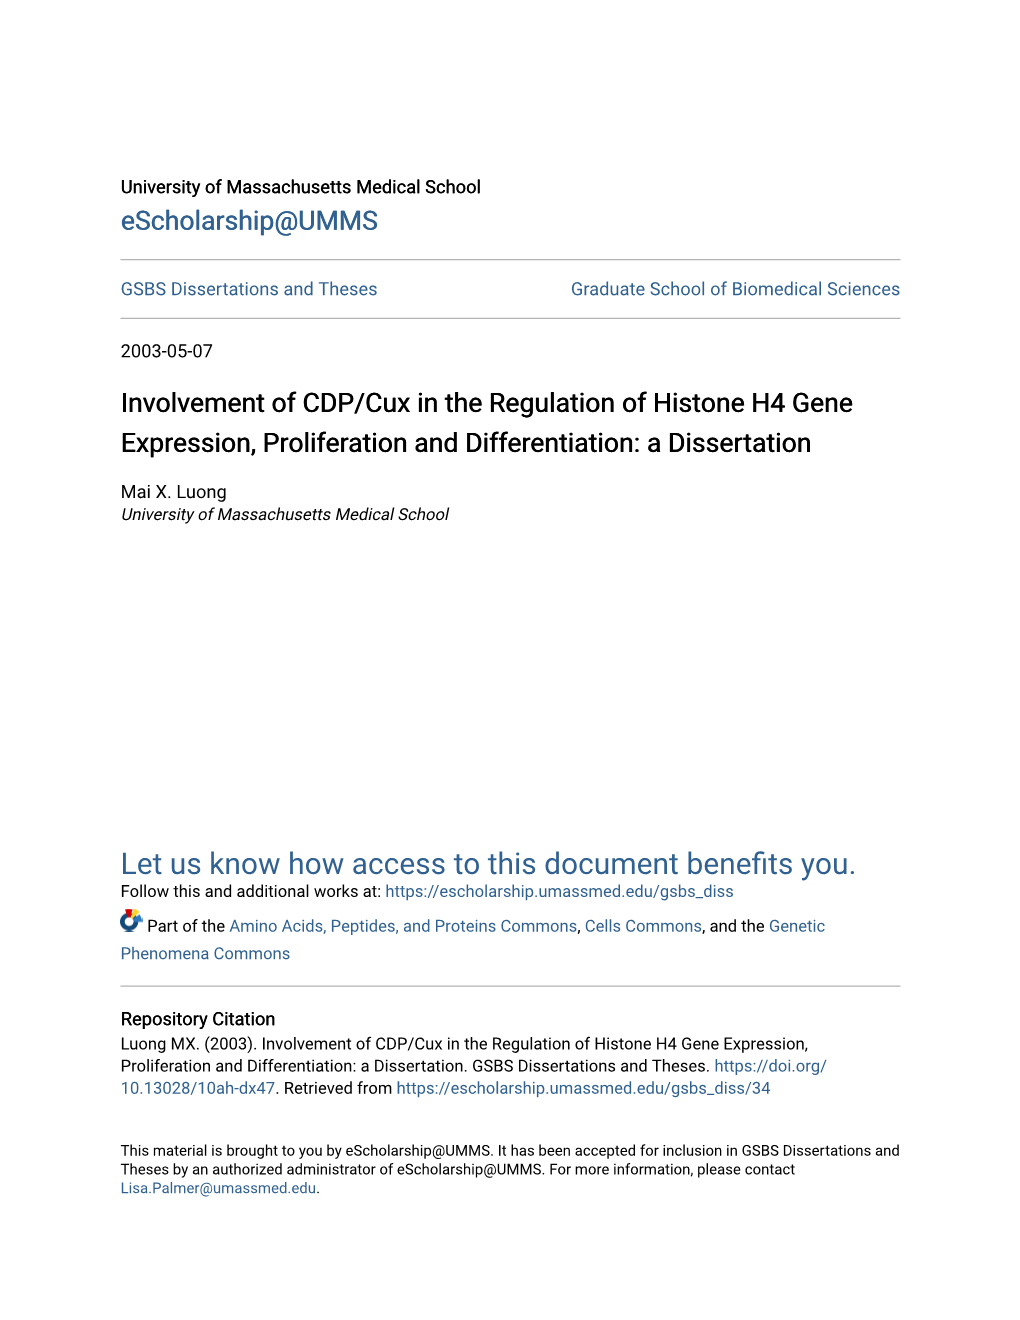 Involvement of CDP/Cux in the Regulation of Histone H4 Gene Expression, Proliferation and Differentiation: a Dissertation